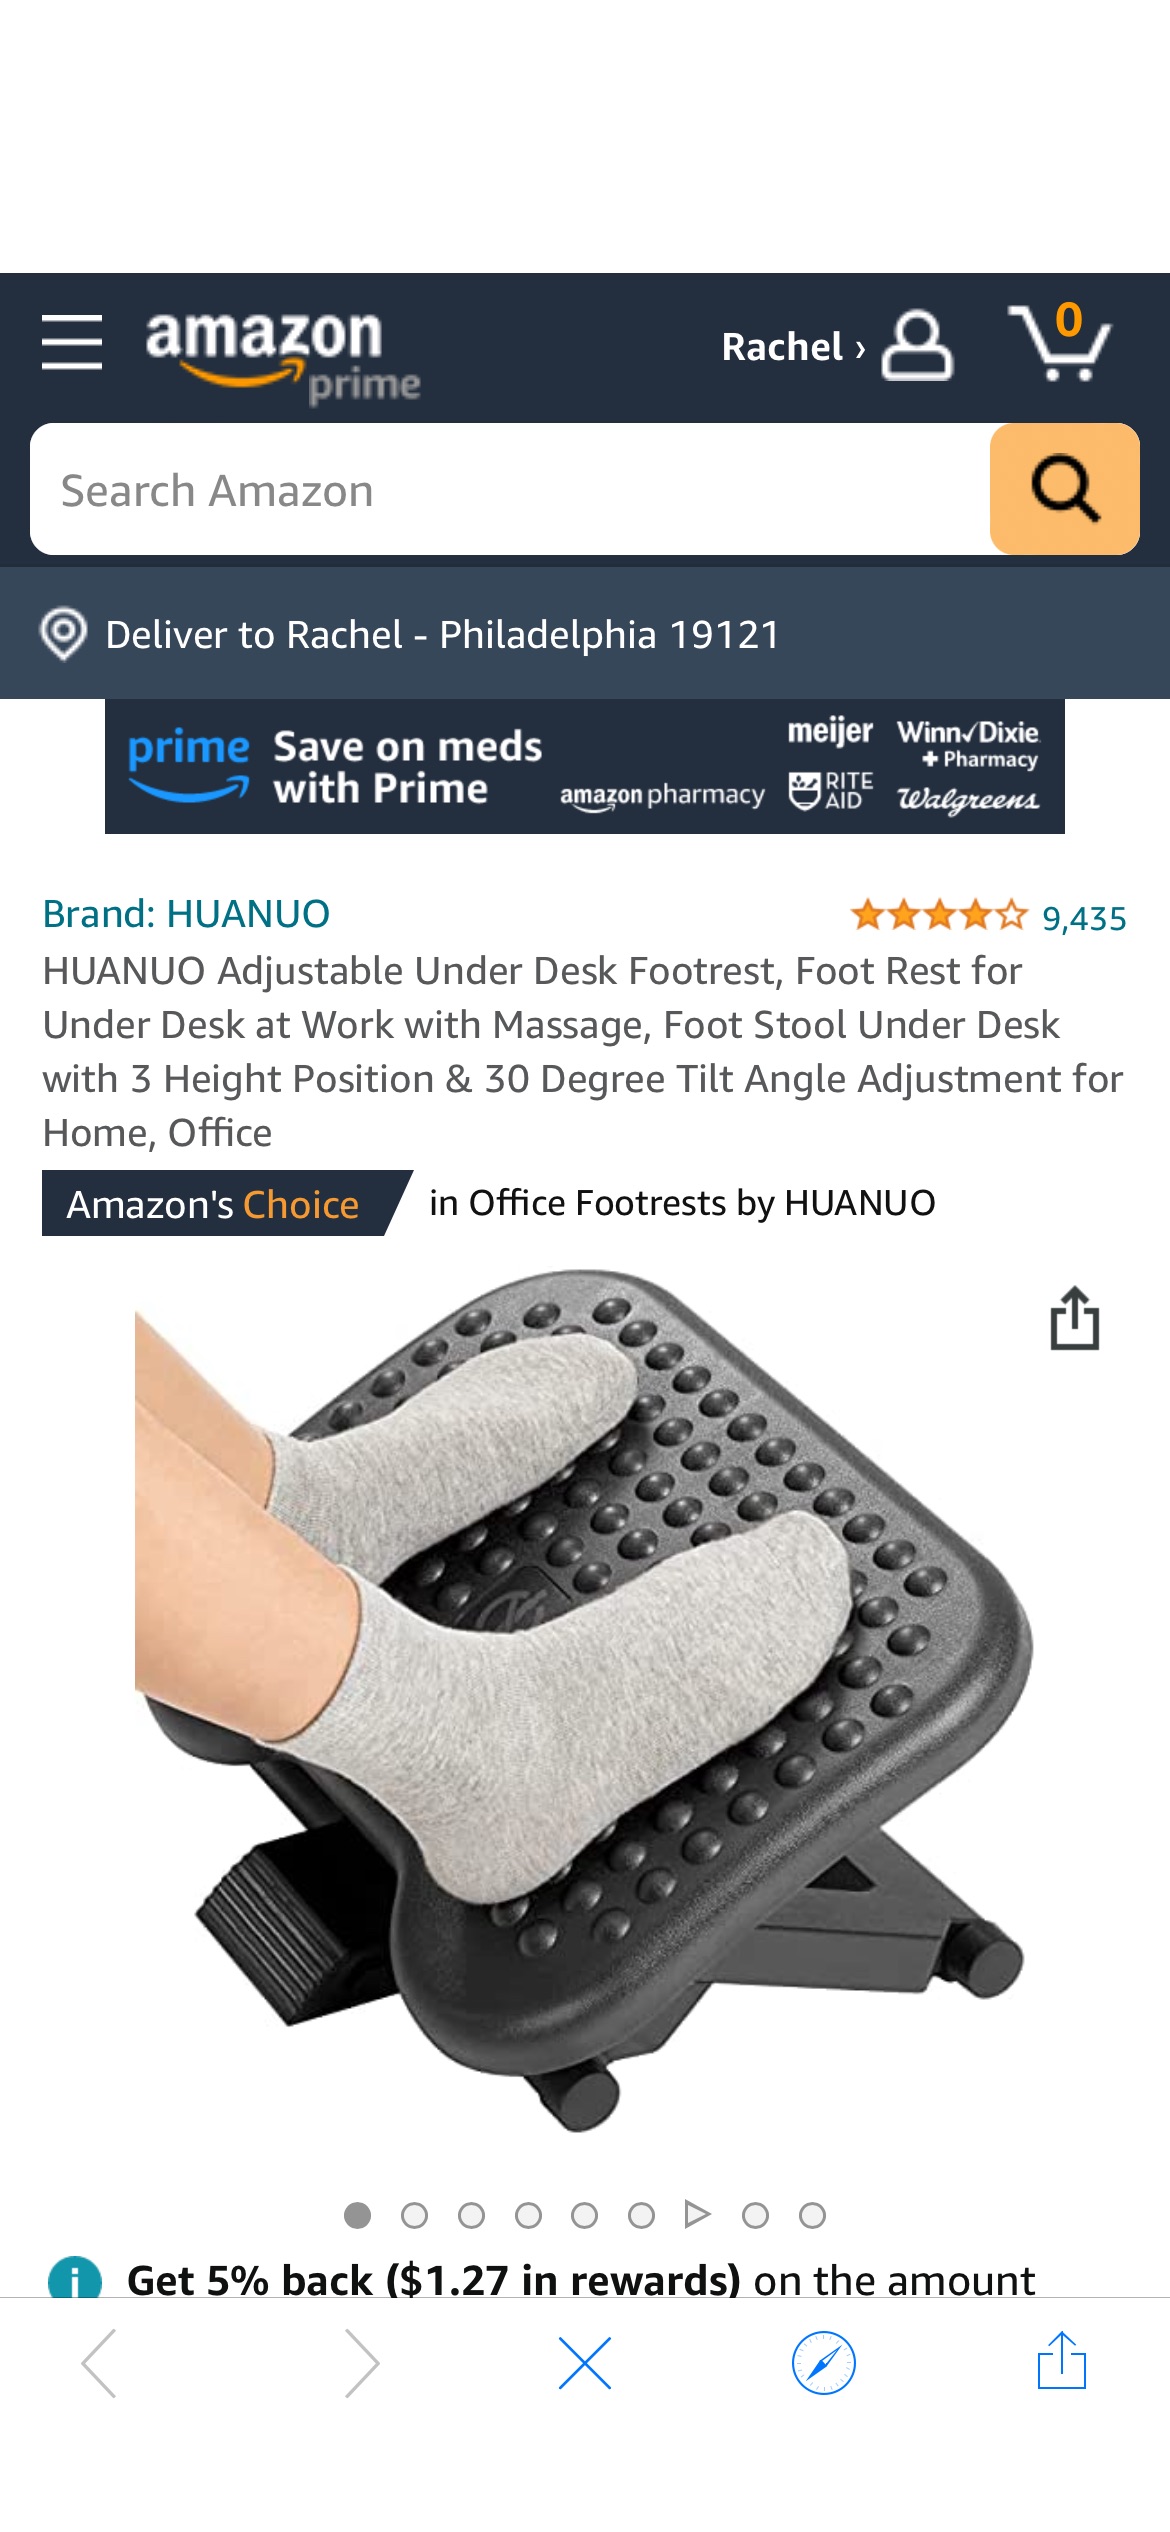 Amazon.com: HUANUO Adjustable Under Desk Footrest, Foot Rest for Under Desk at Work with Massage, Office Products